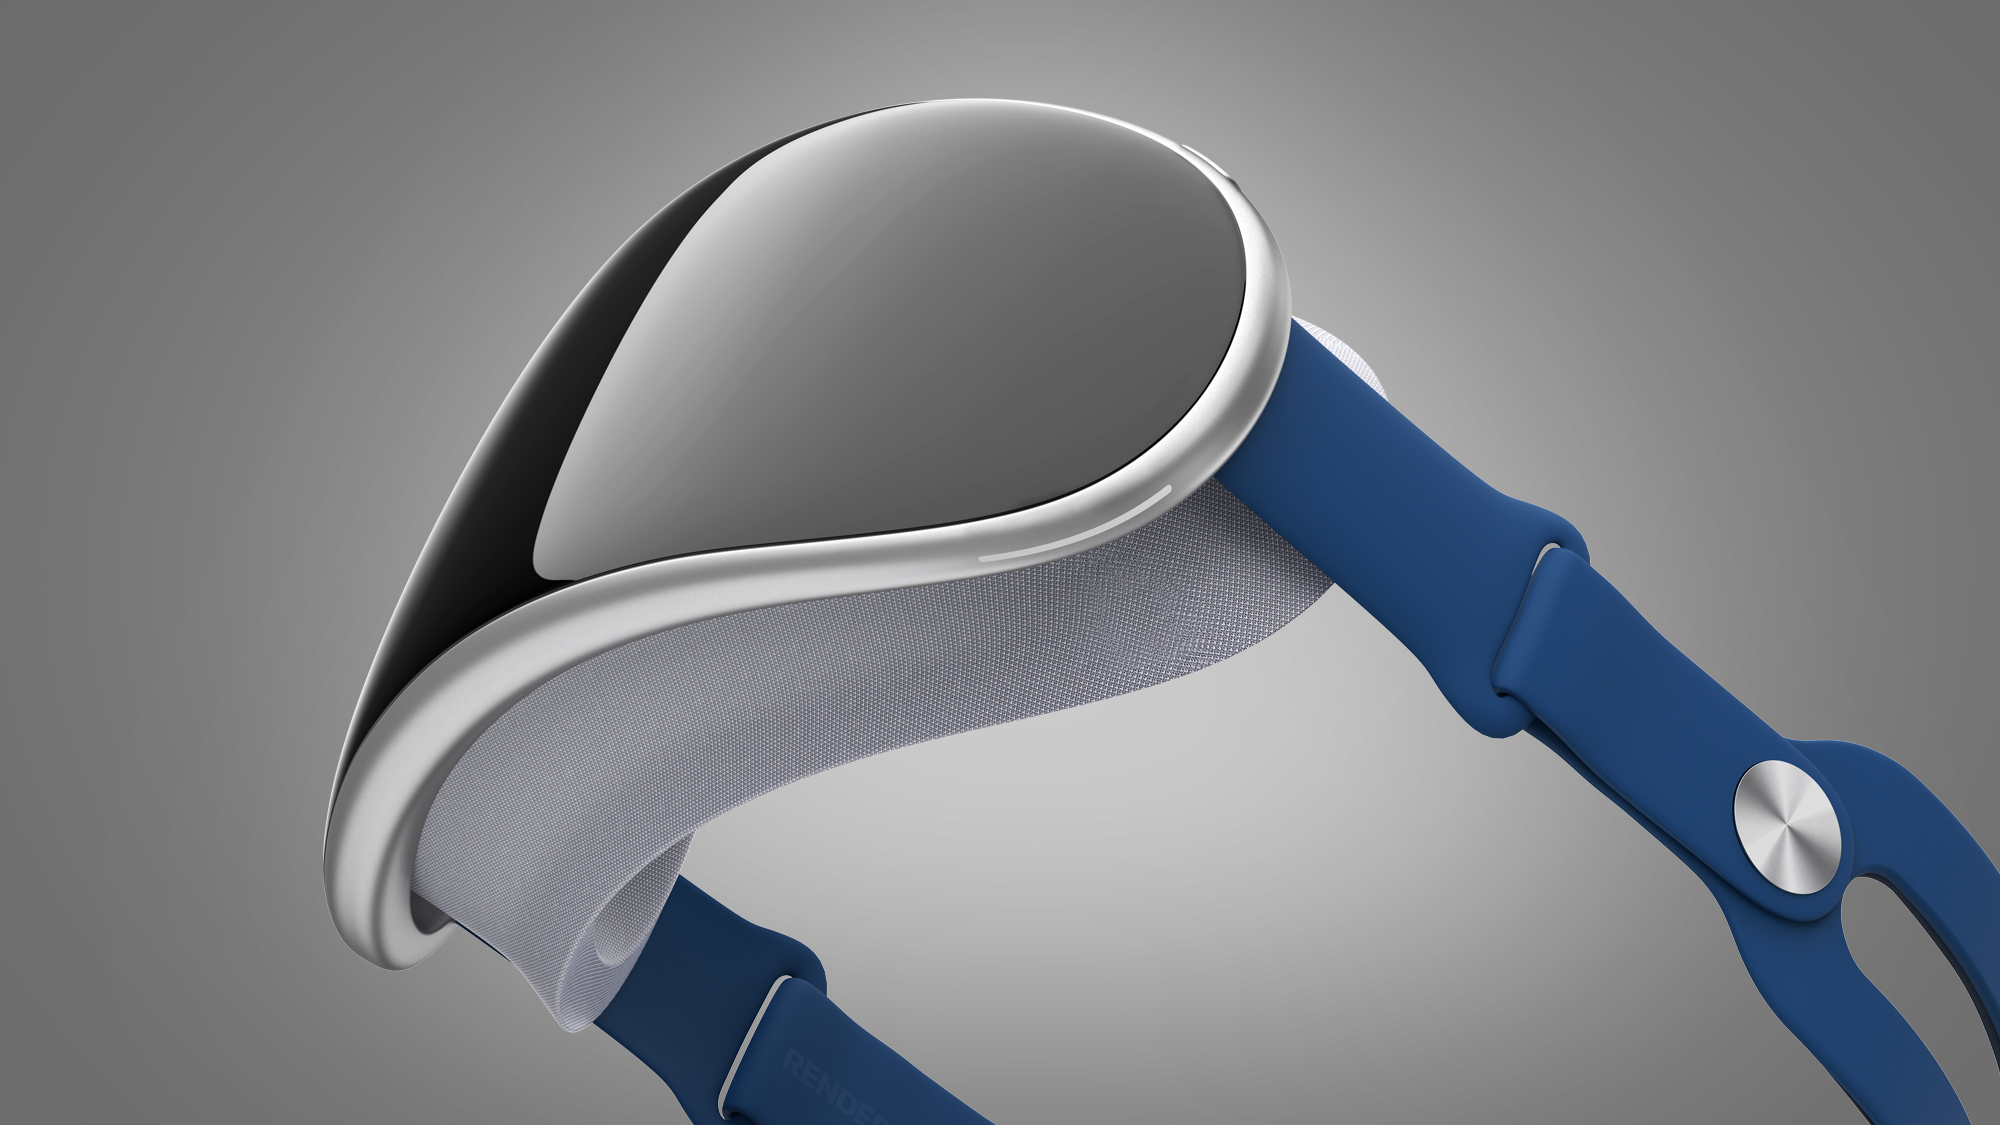 A render of the rumored Apple Reality Pro headset on a grey background